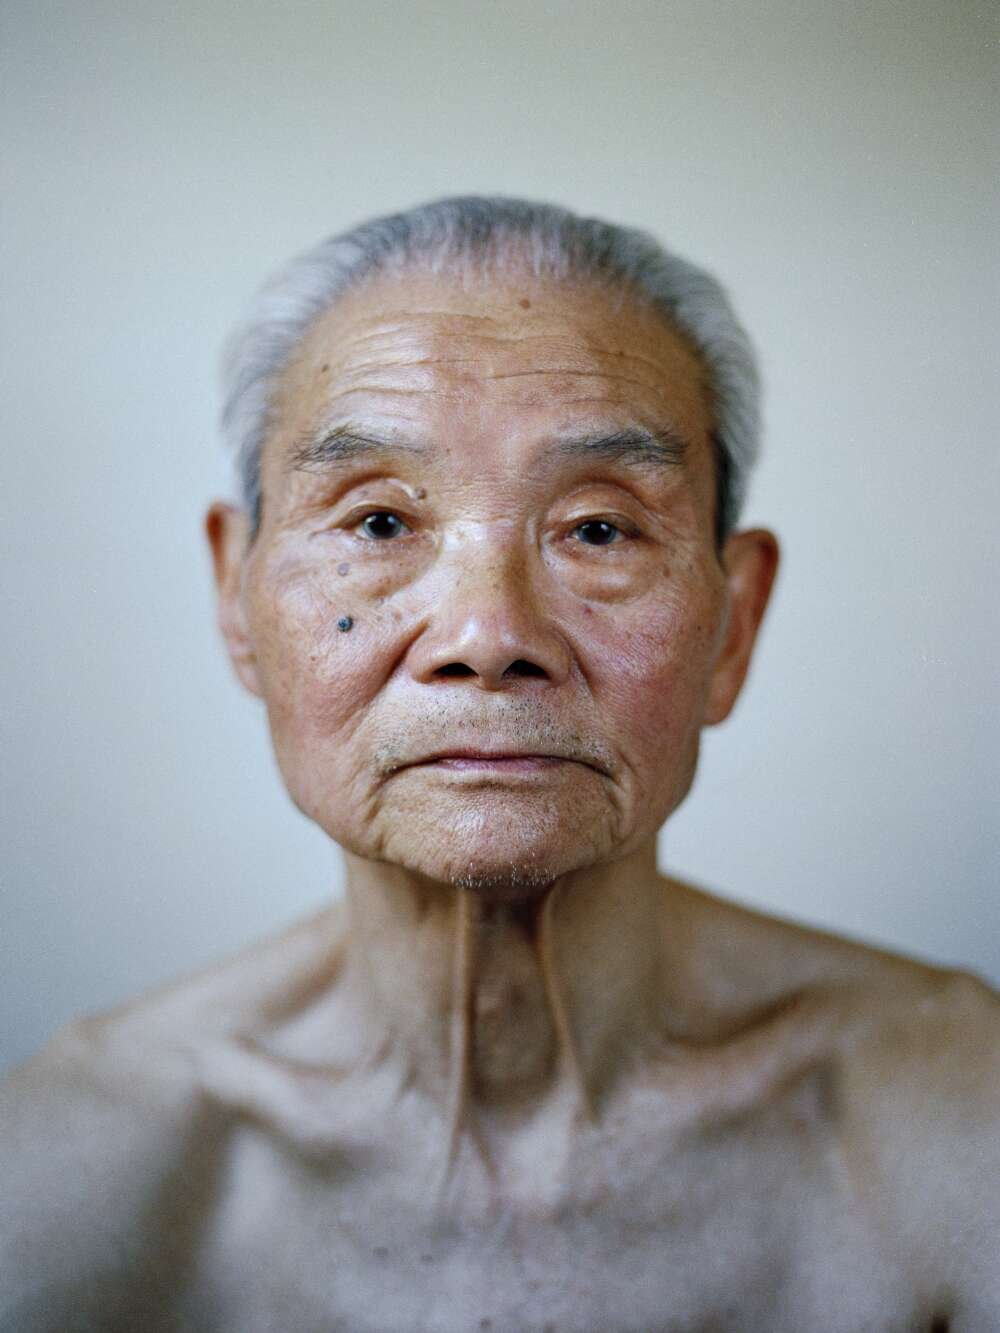 A close-up of an elderly man looking directly into the camera